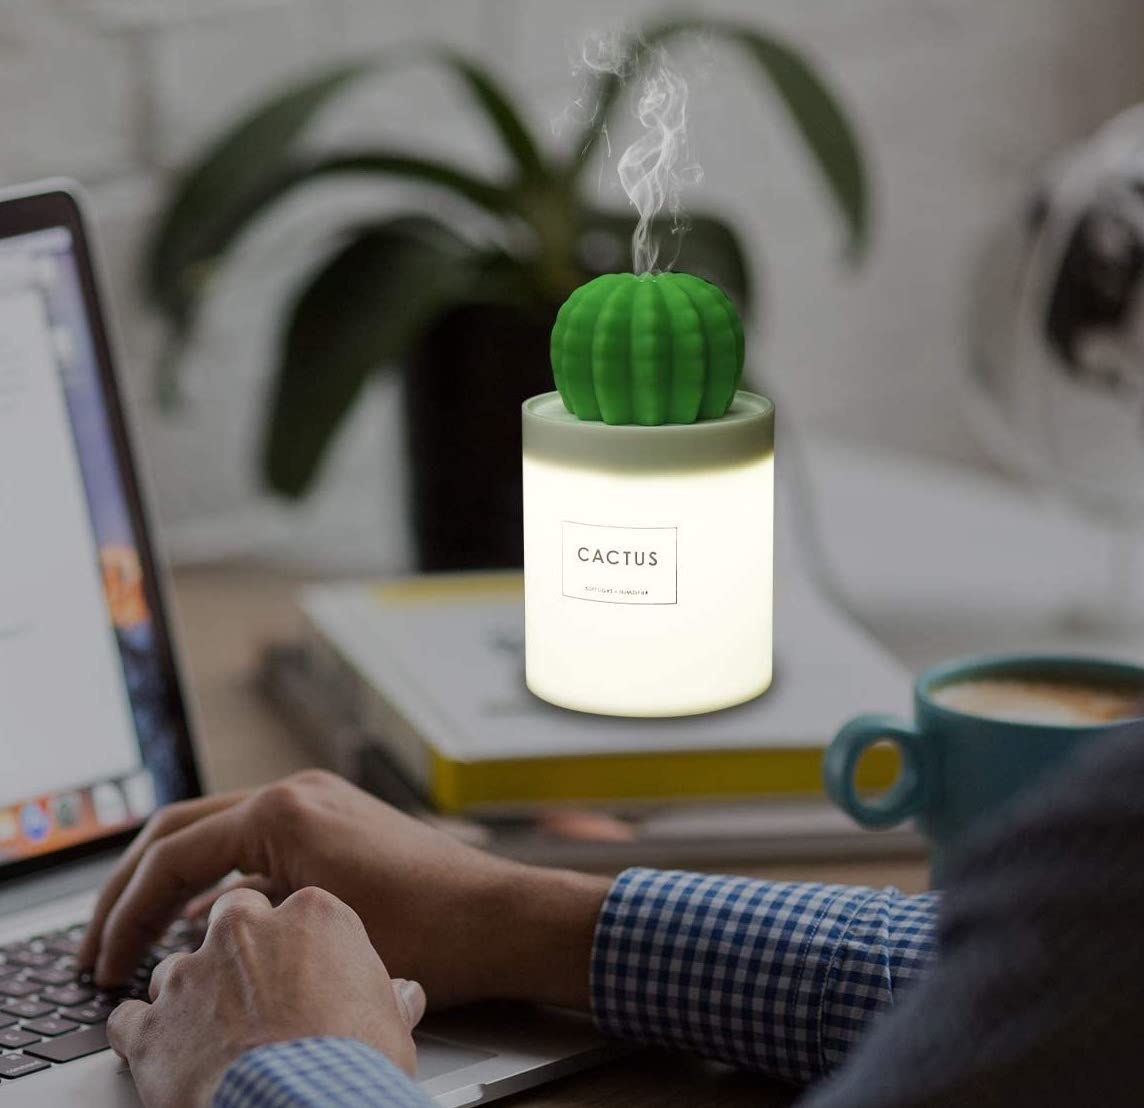 Cactus-shaped humidifier placed on desk